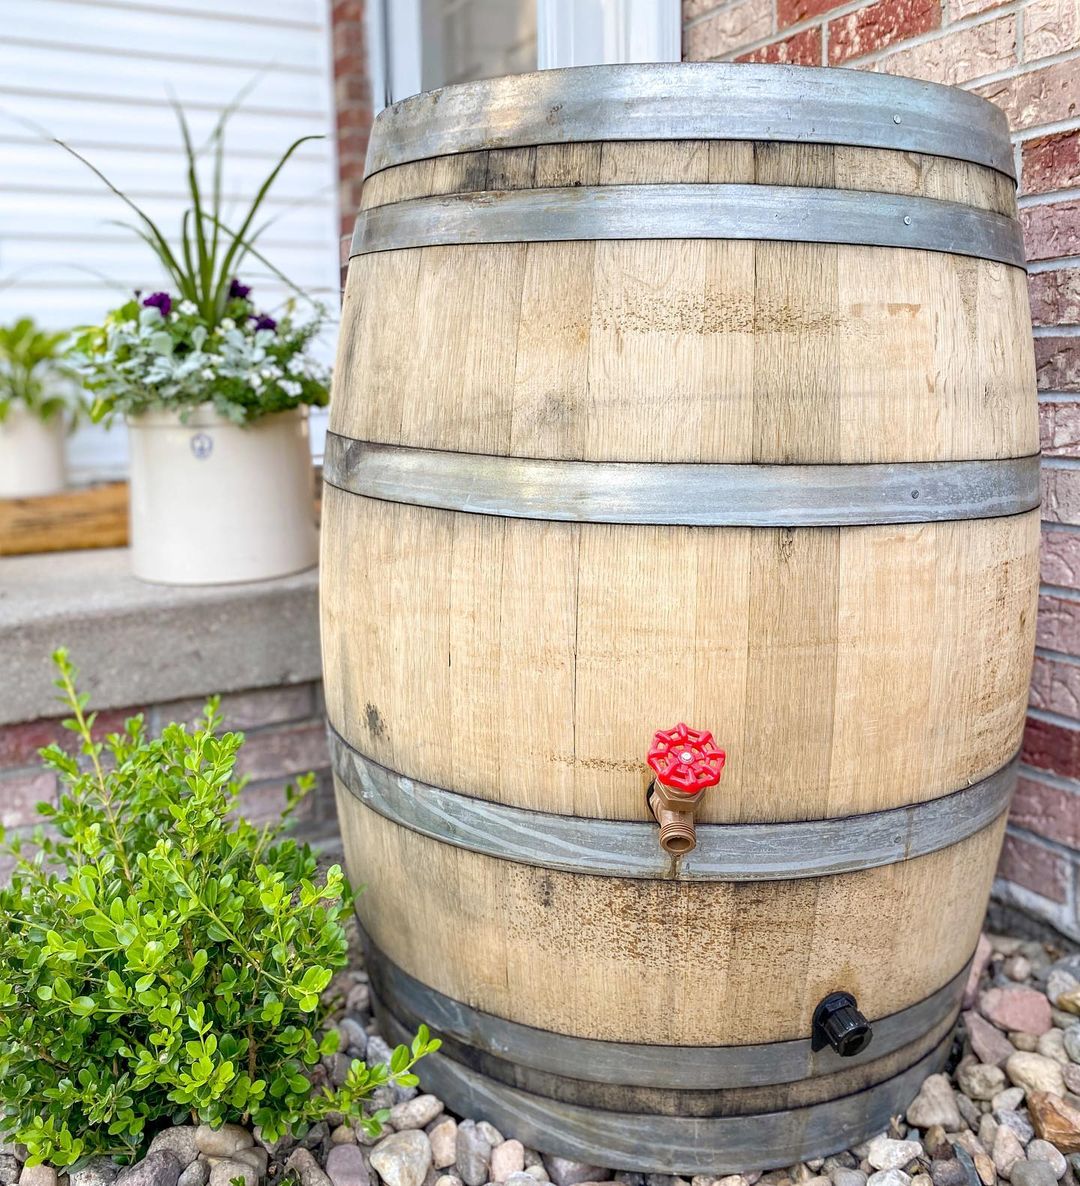 Wooden Barrel Designed to Be an Outdoor Rain Water Catcher. Photo by Instagram user @midwestlifeandstyle